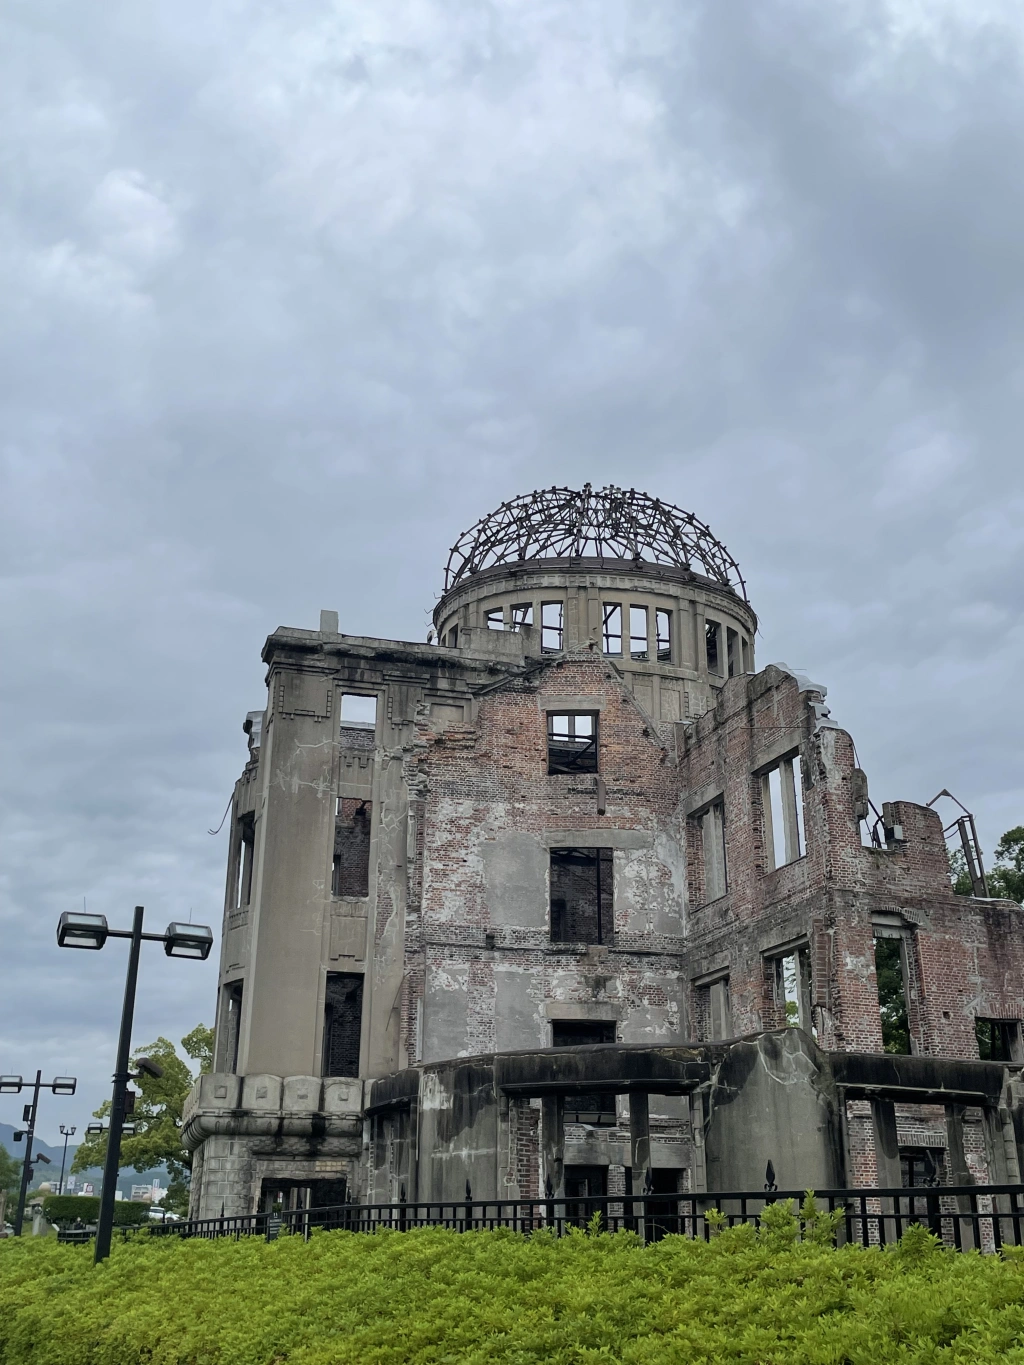 Exploring historic places in Japan: the Atomic Bomb Dome